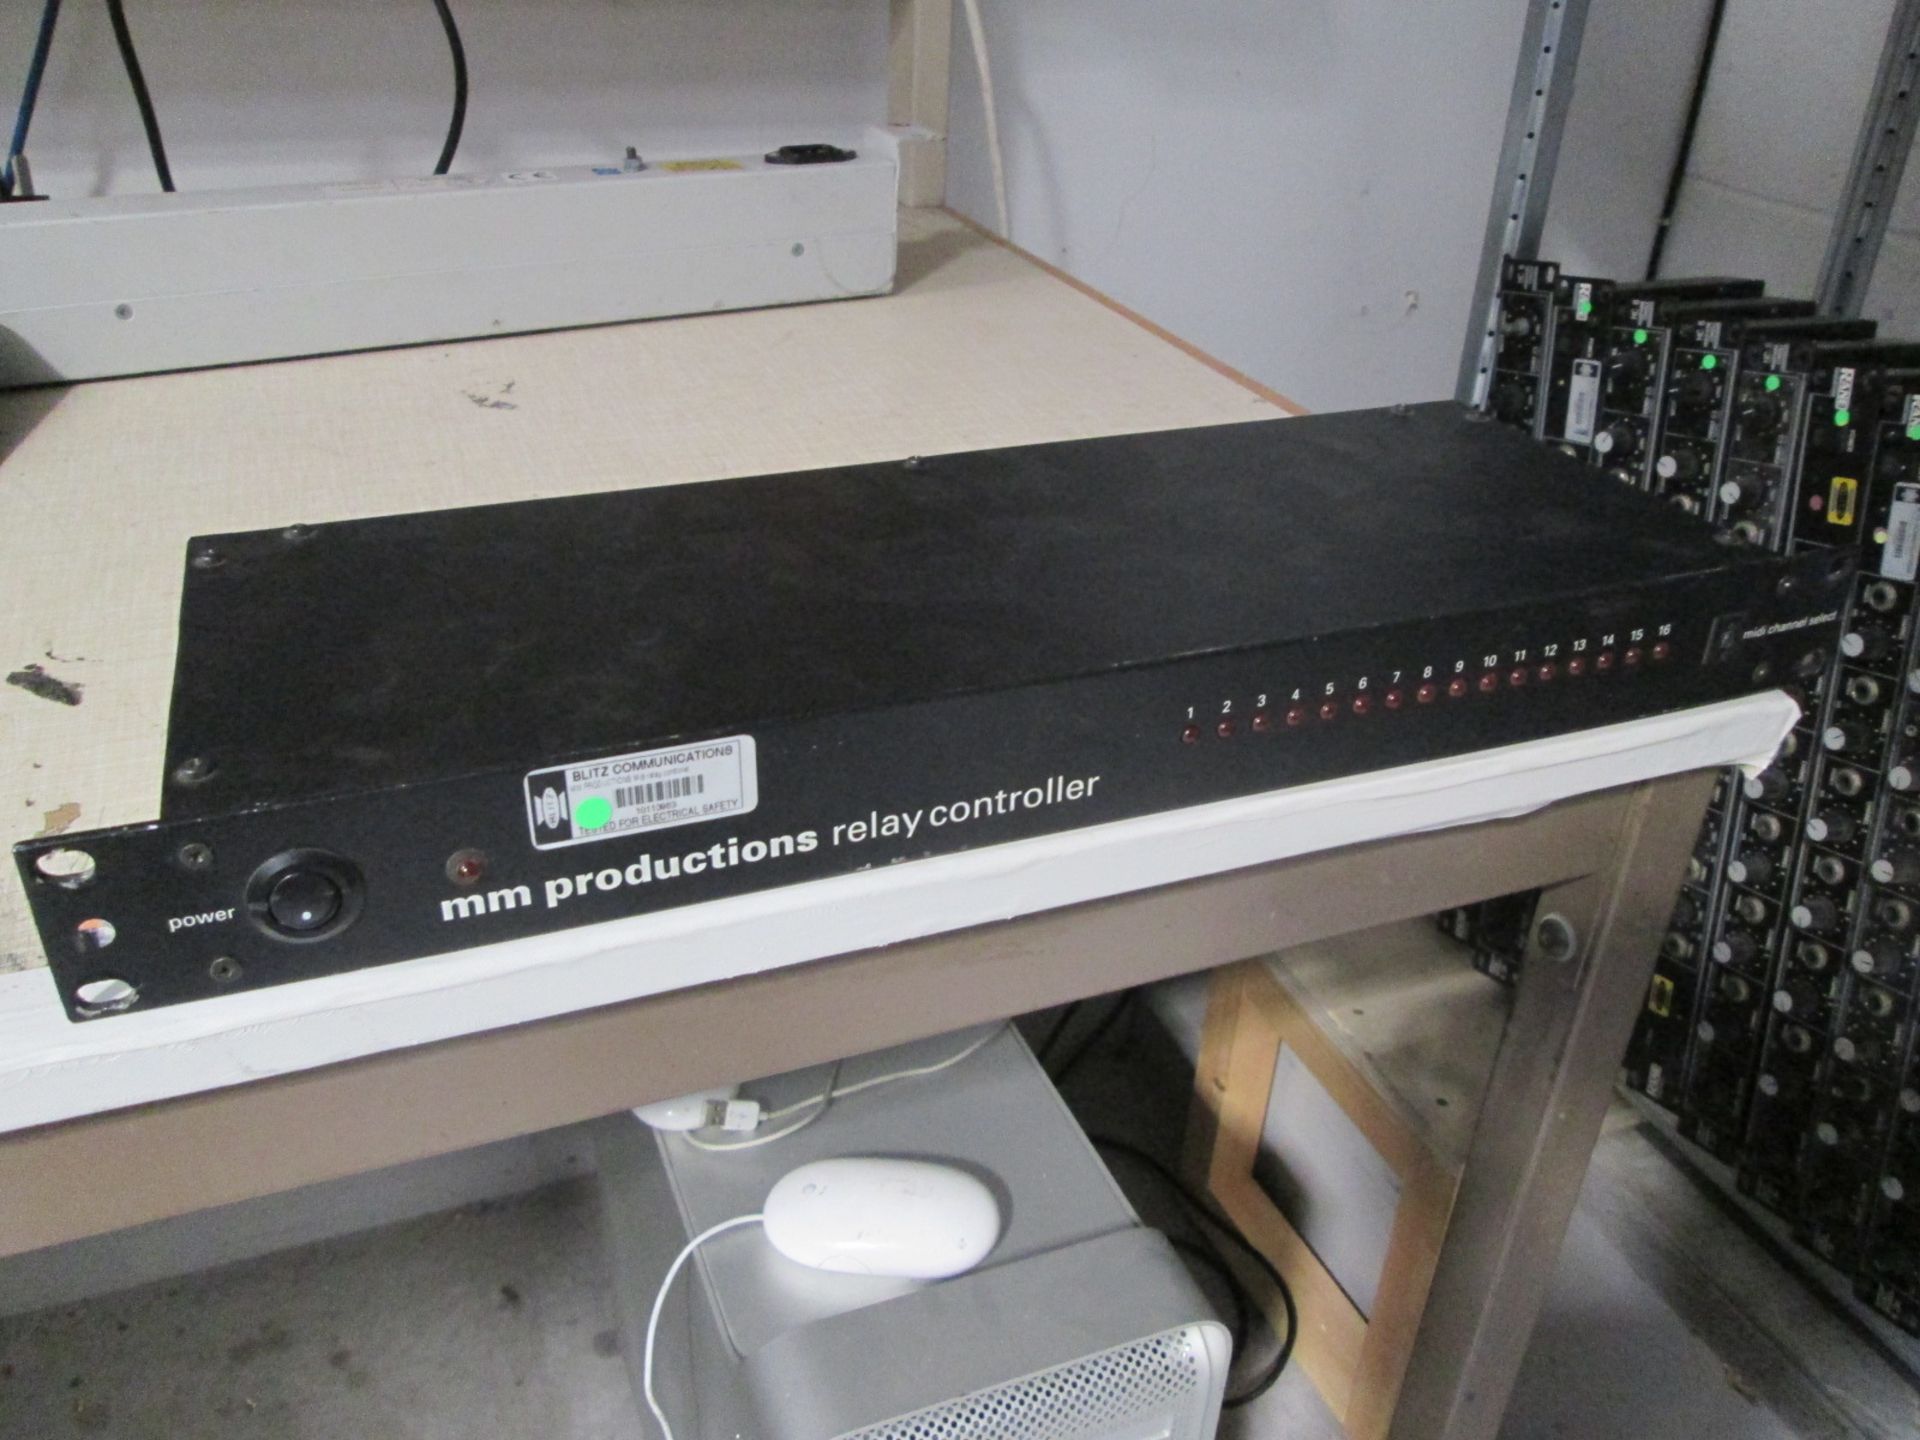 MM Productions Relay Controllers (Qty 3) 1U rack mount frame